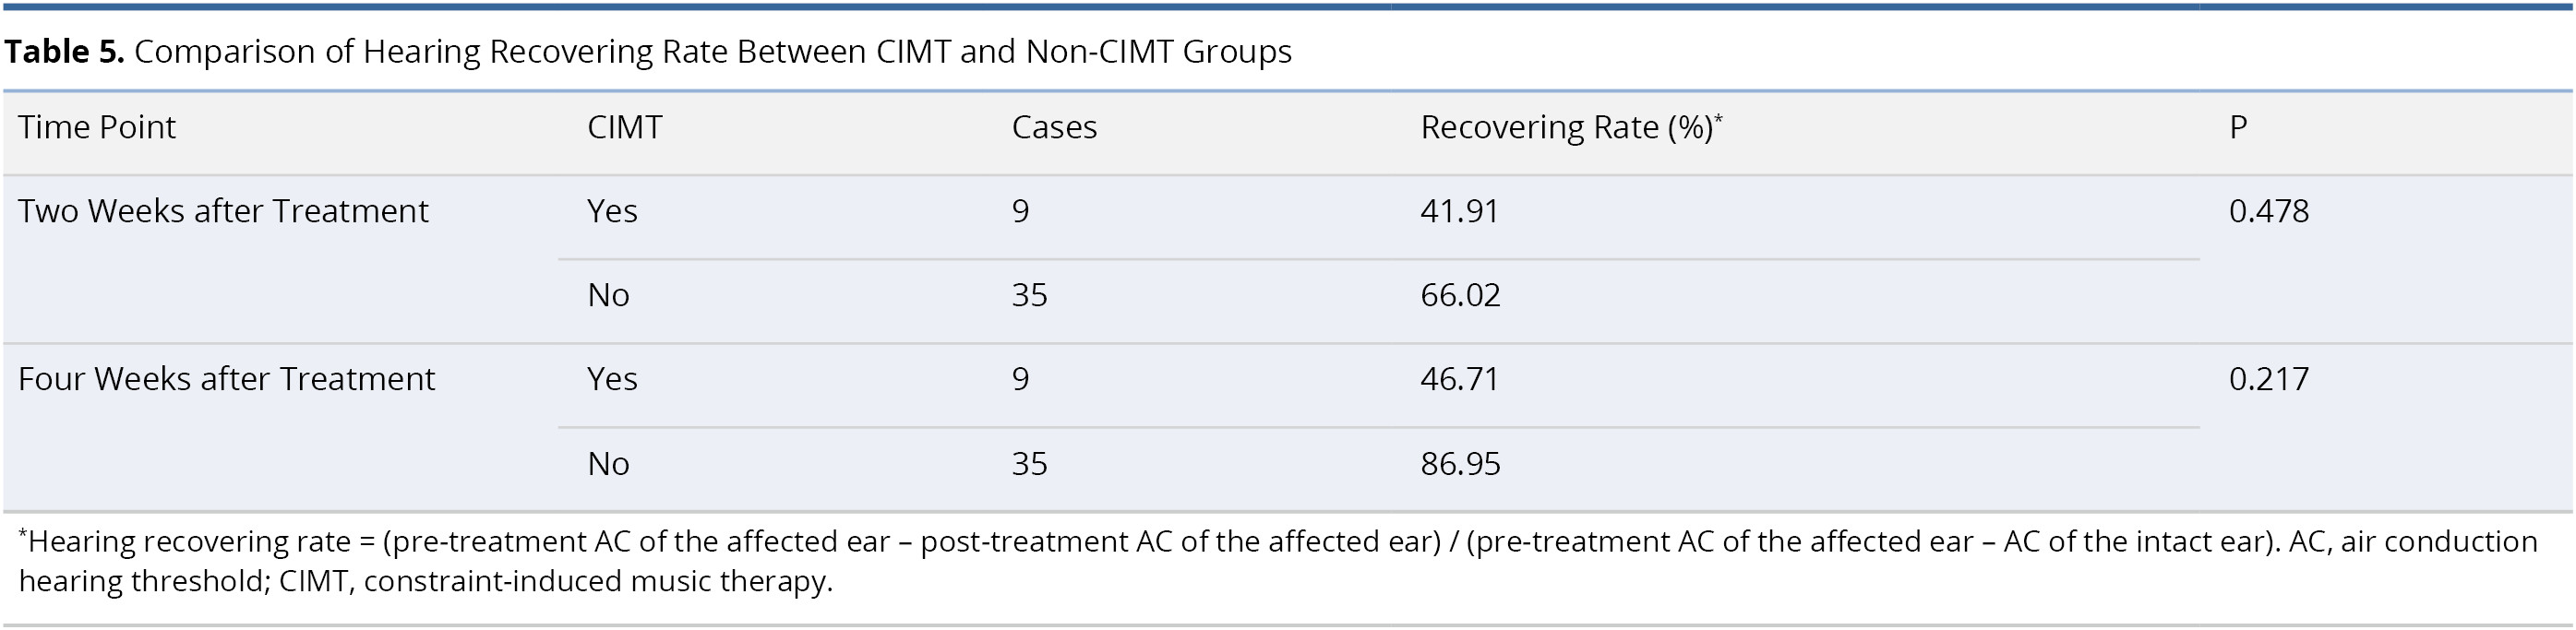 Table 5.jpgComparison of Hearing Recovering Rate Between CIMT and Non-CIMT Groups